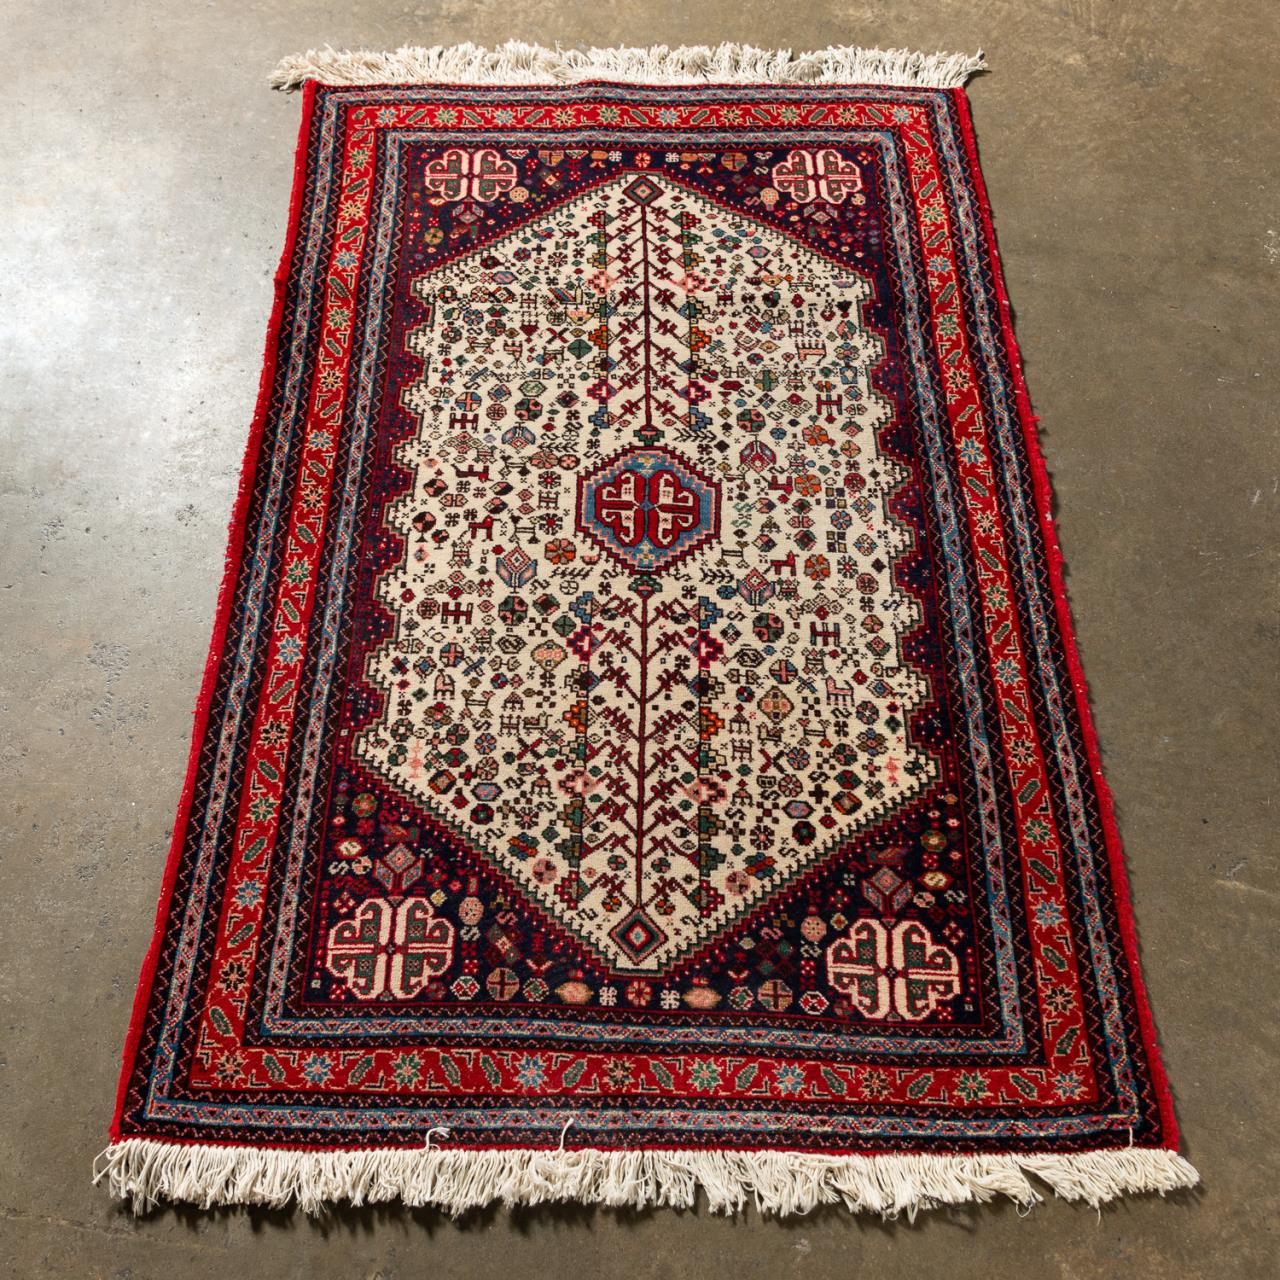 HAND WOVEN ARDABIL SMALL RUG, 3'3"